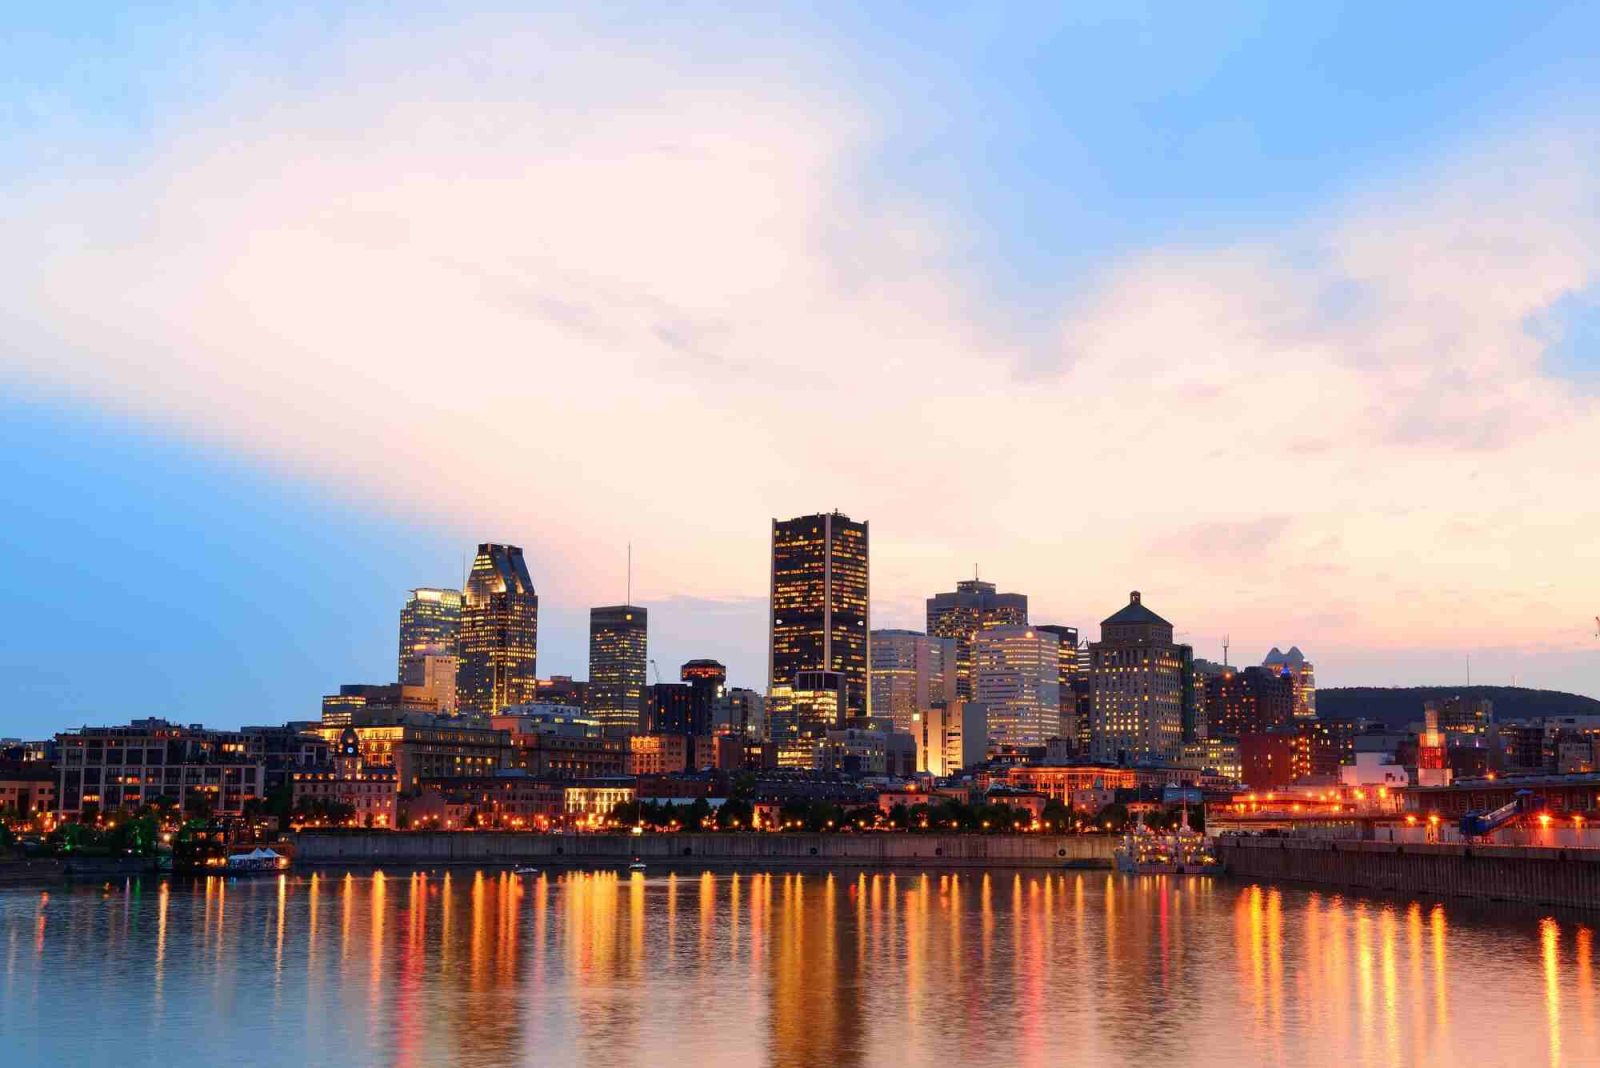 20230926151013 fpdl.in montreal river sunset with city lights urban buildings 649448 4530 full 1